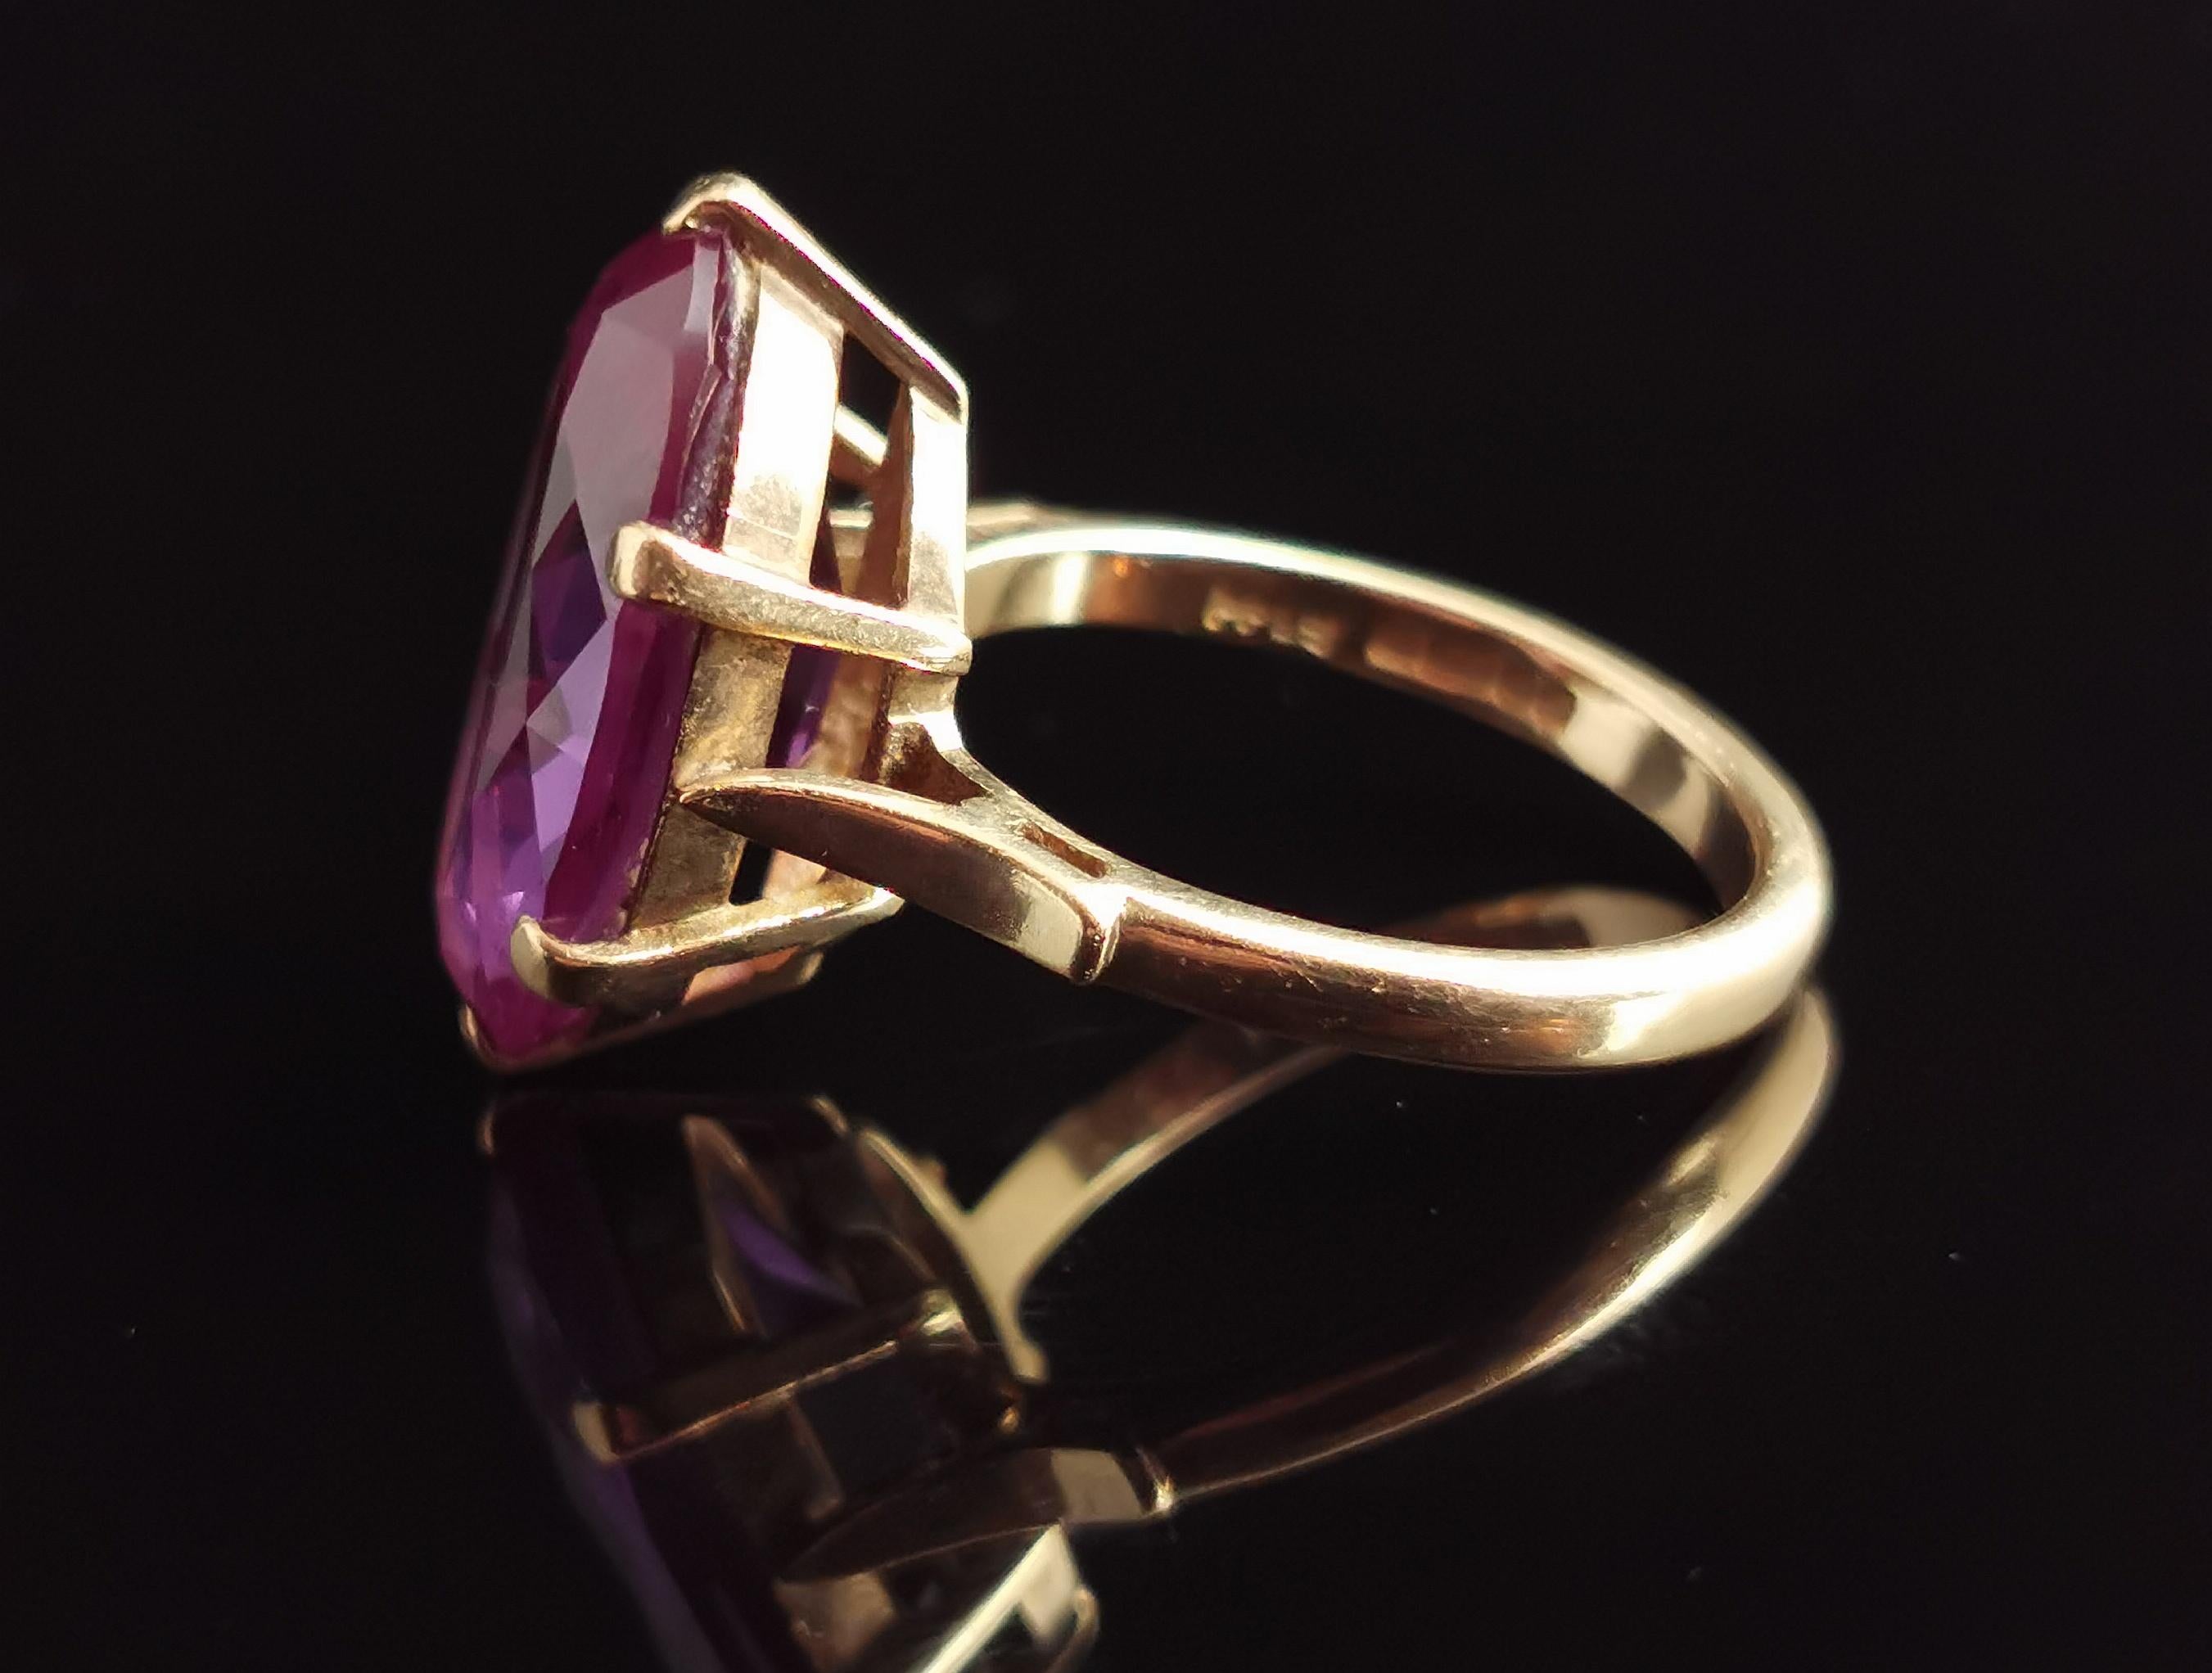 Vintage Colour Change Sapphire Cocktail Ring, 9k Yellow Gold, Alexandrite 2